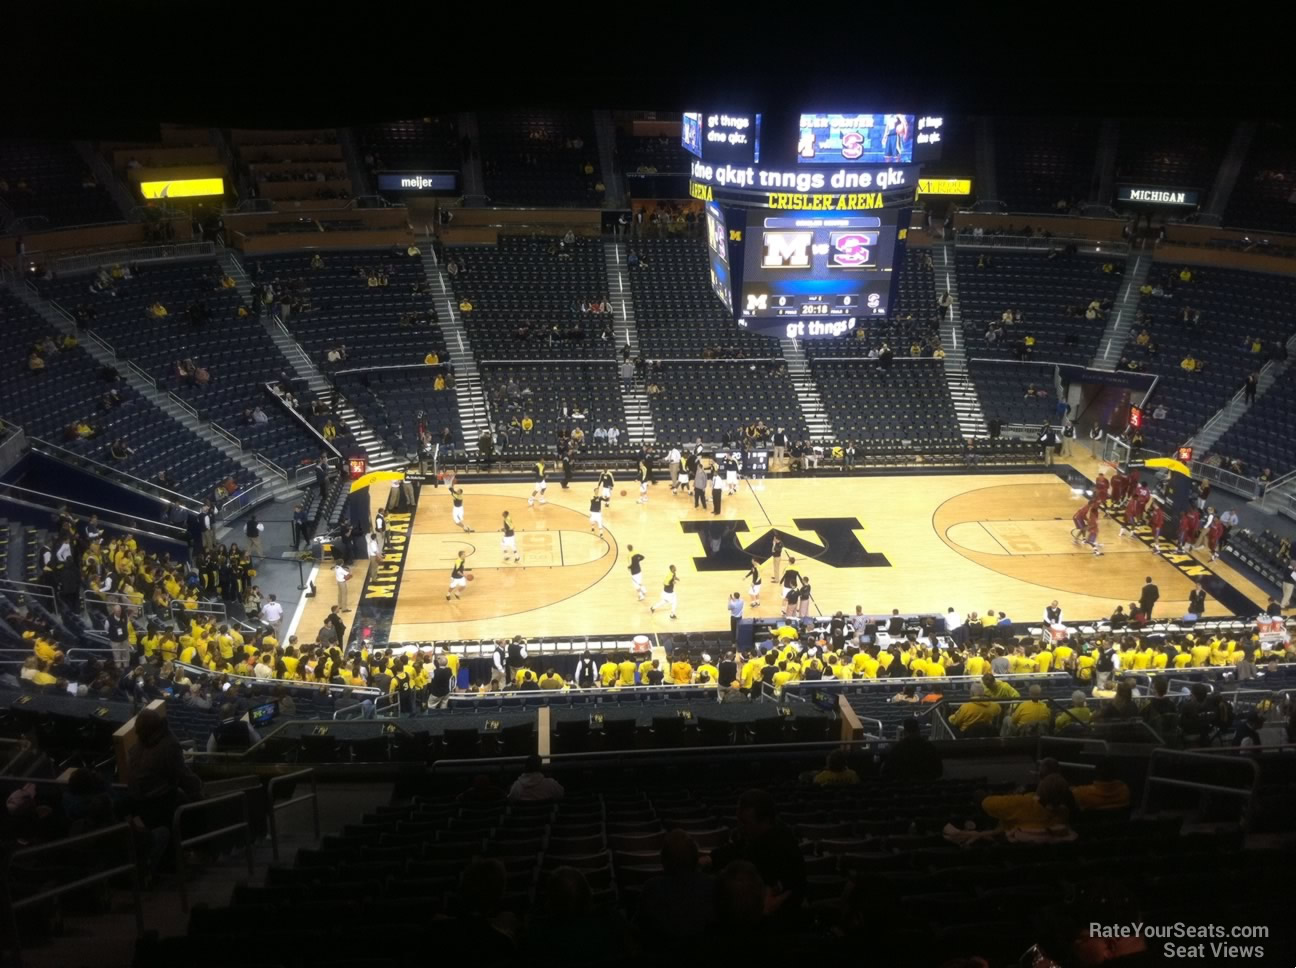 section 224, row 38 seat view  - crisler center